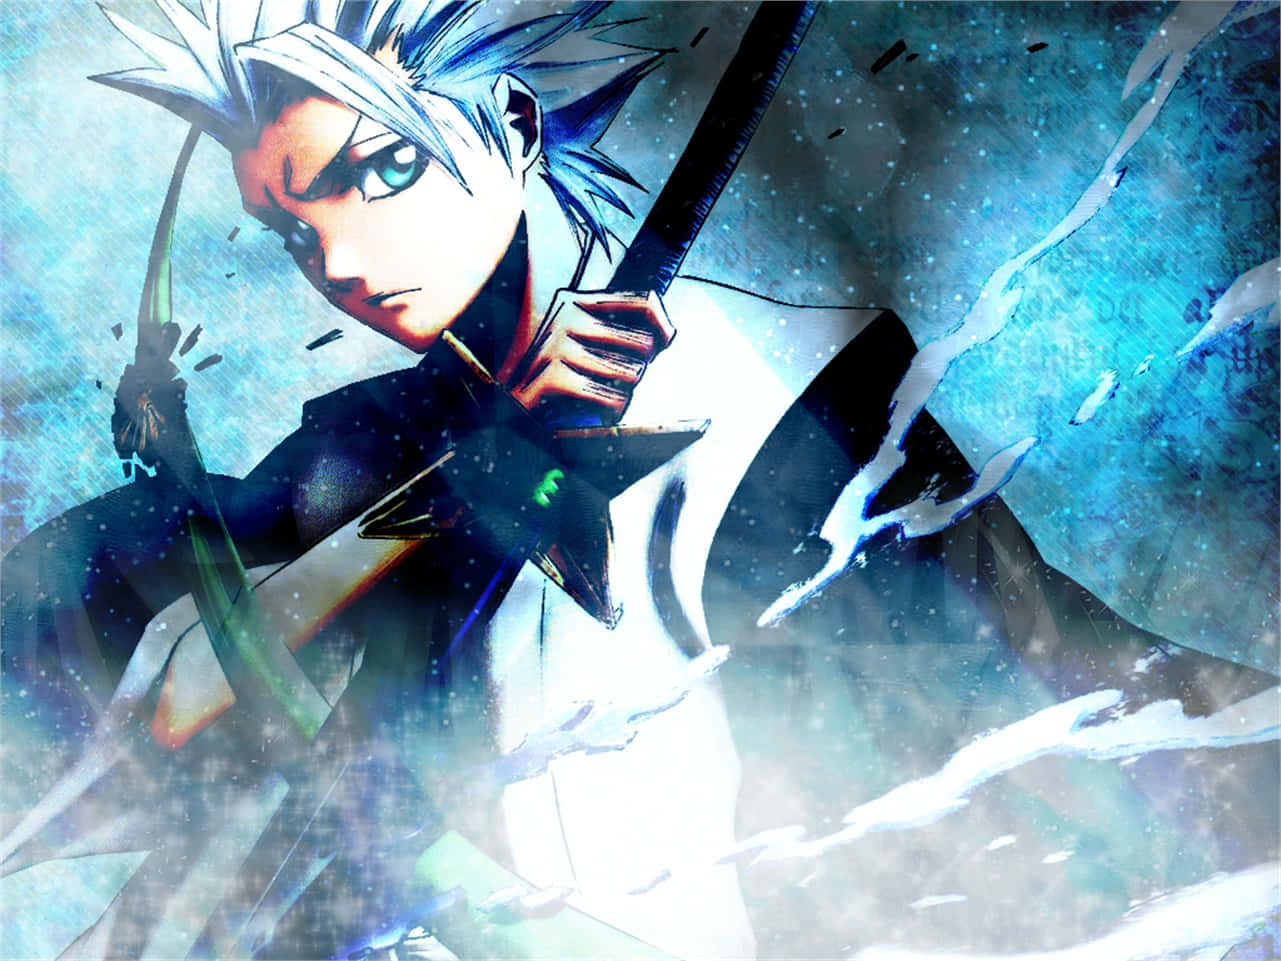 Toshiro Hitsugaya, the Captain of the 10th Division of the Gotei 13 Wallpaper